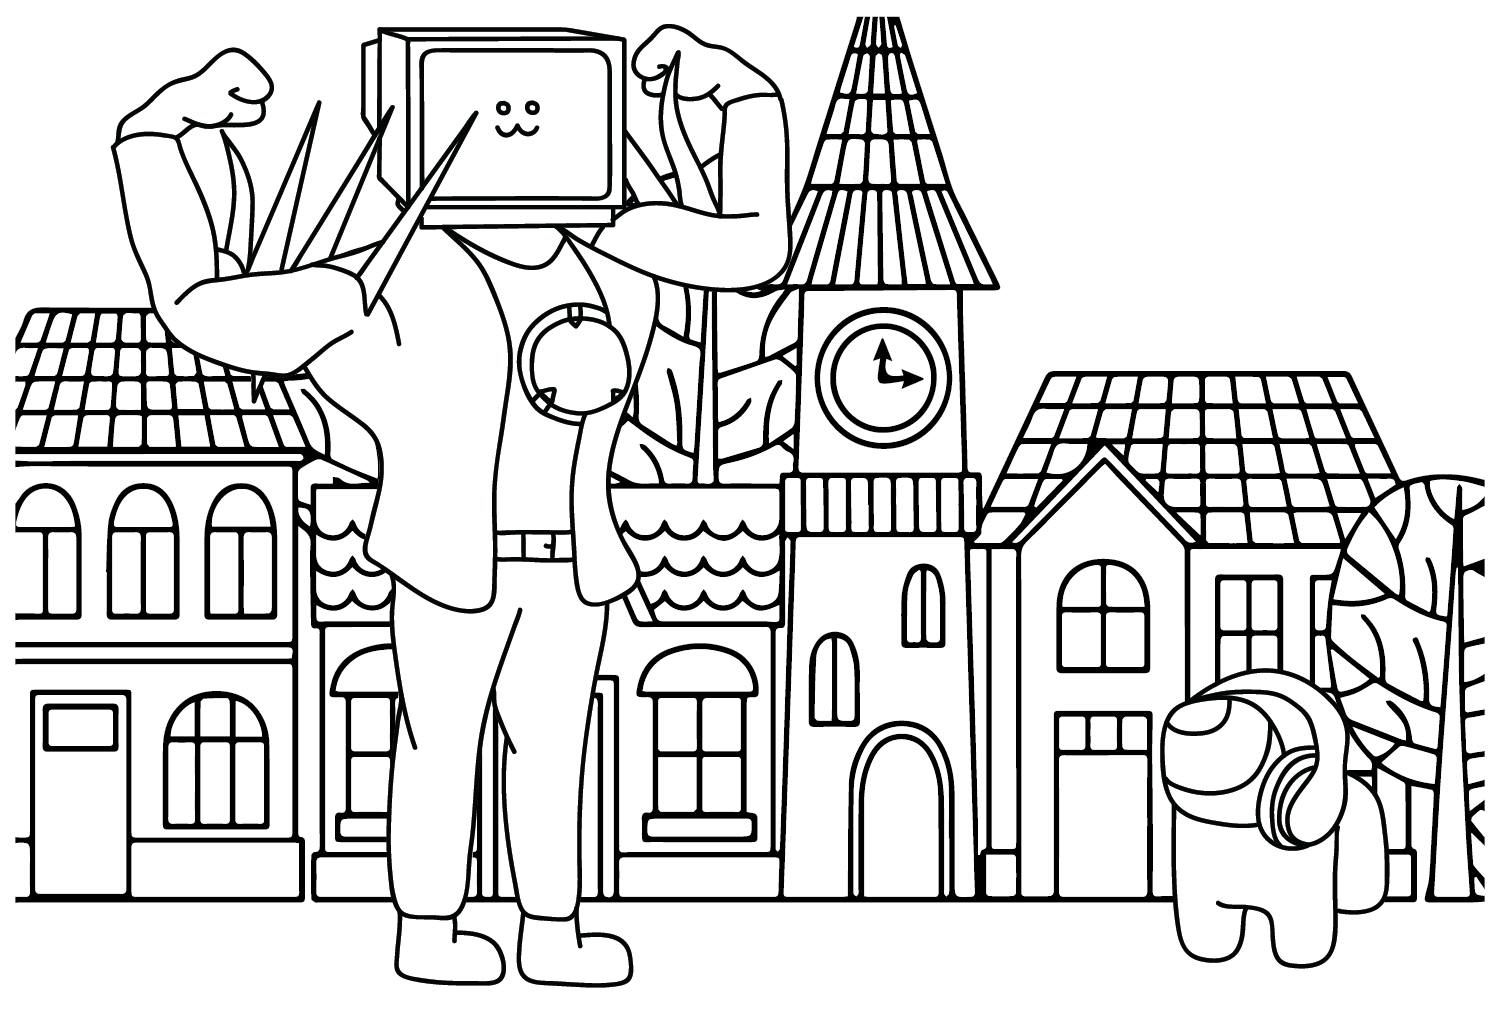 Titan TV Man, Among Us to Color - Free Printable Coloring Pages